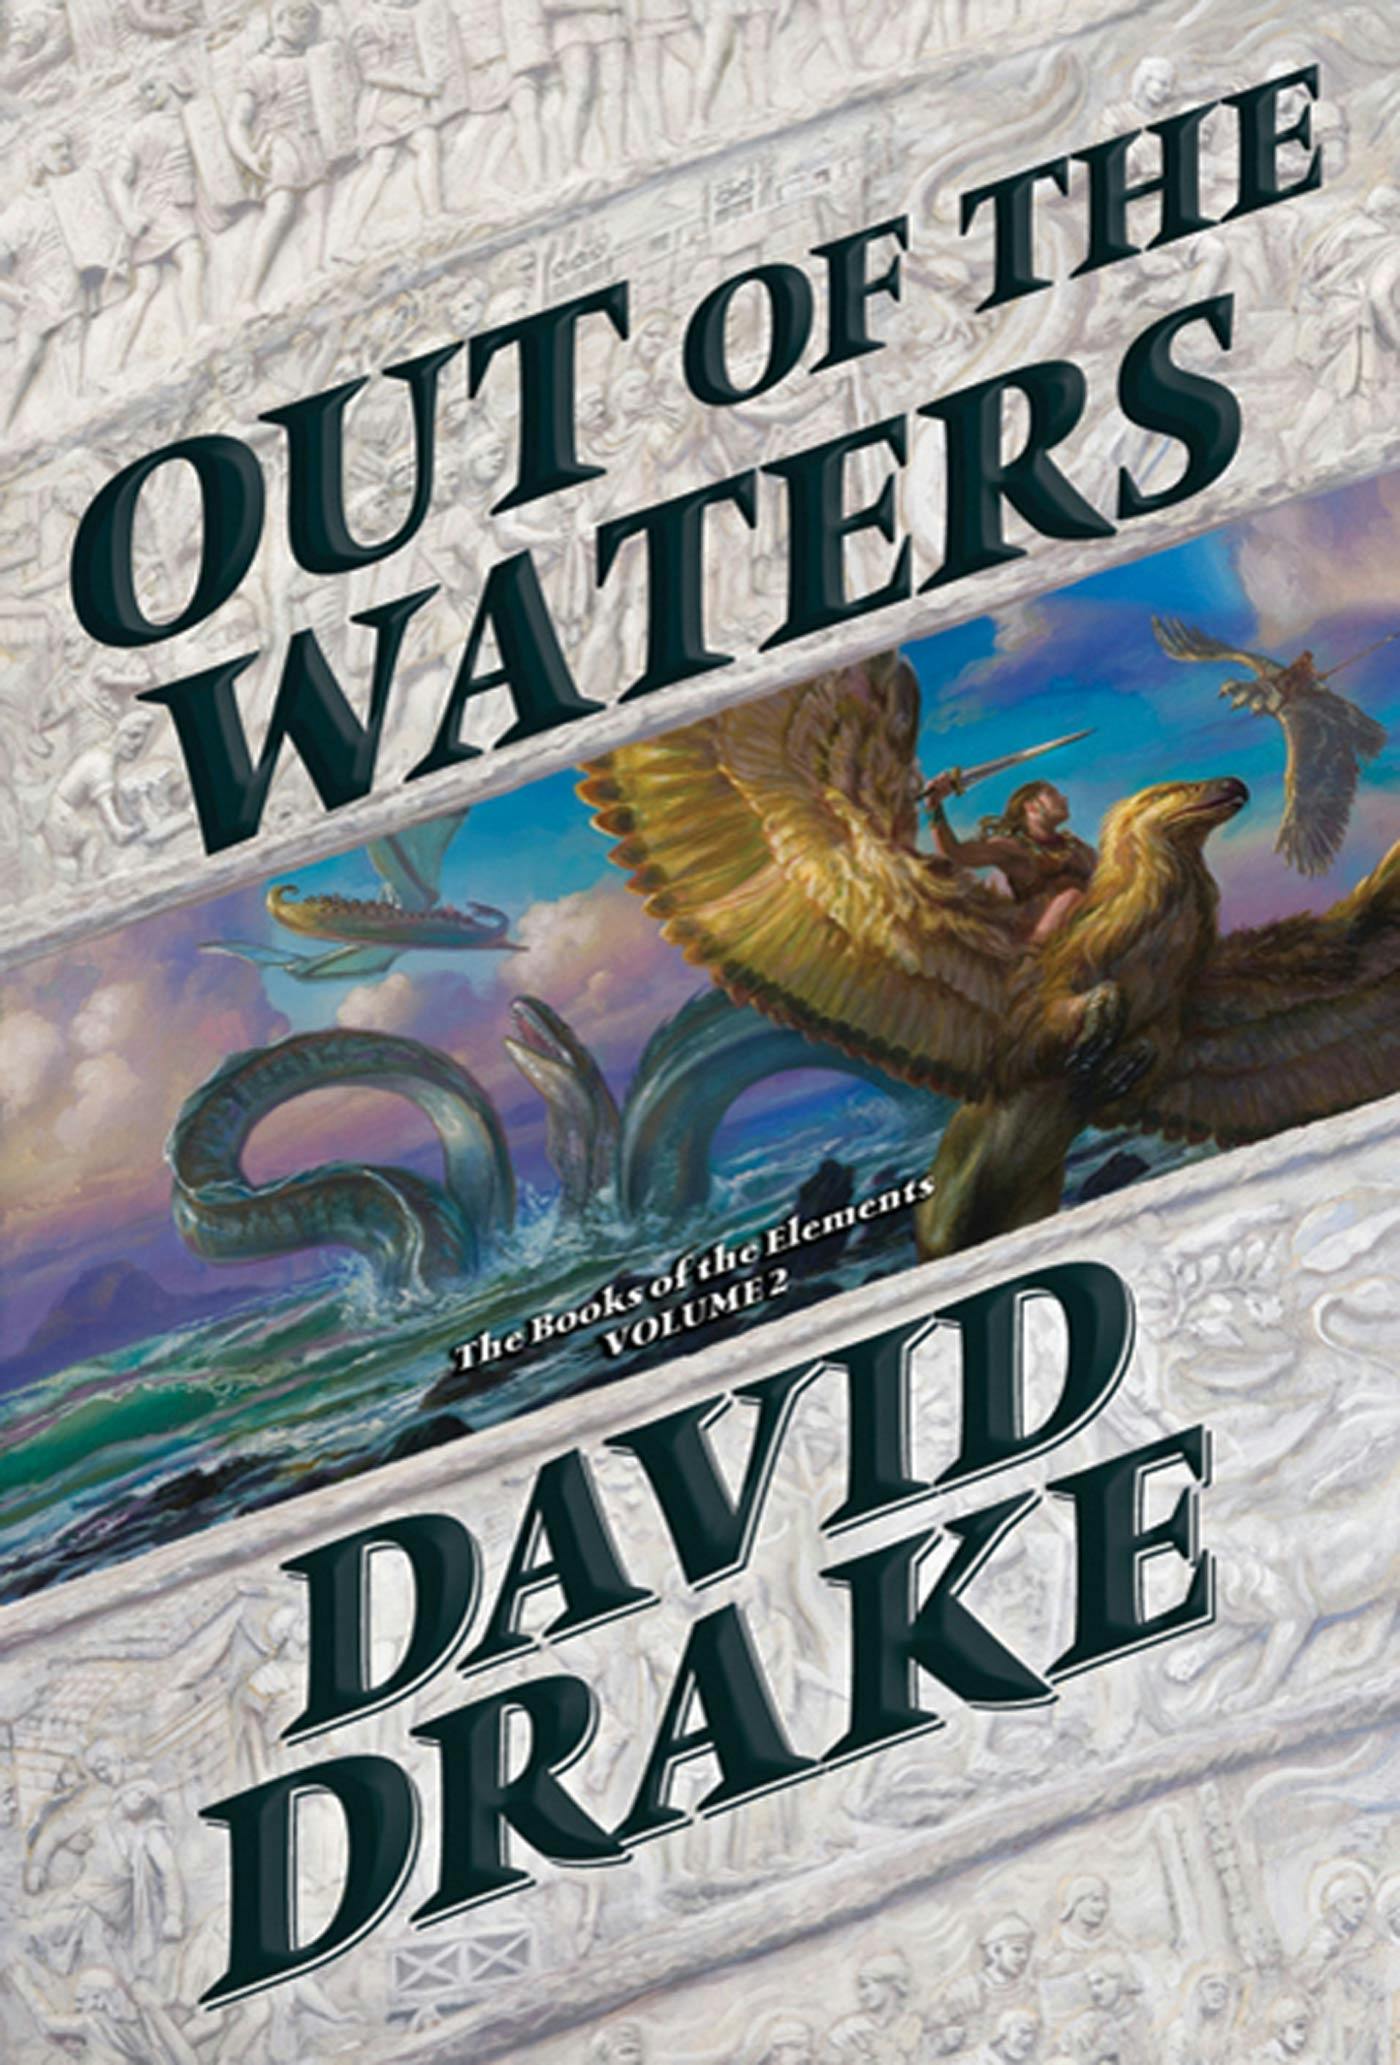 Cover for the book titled as: Out of the Waters